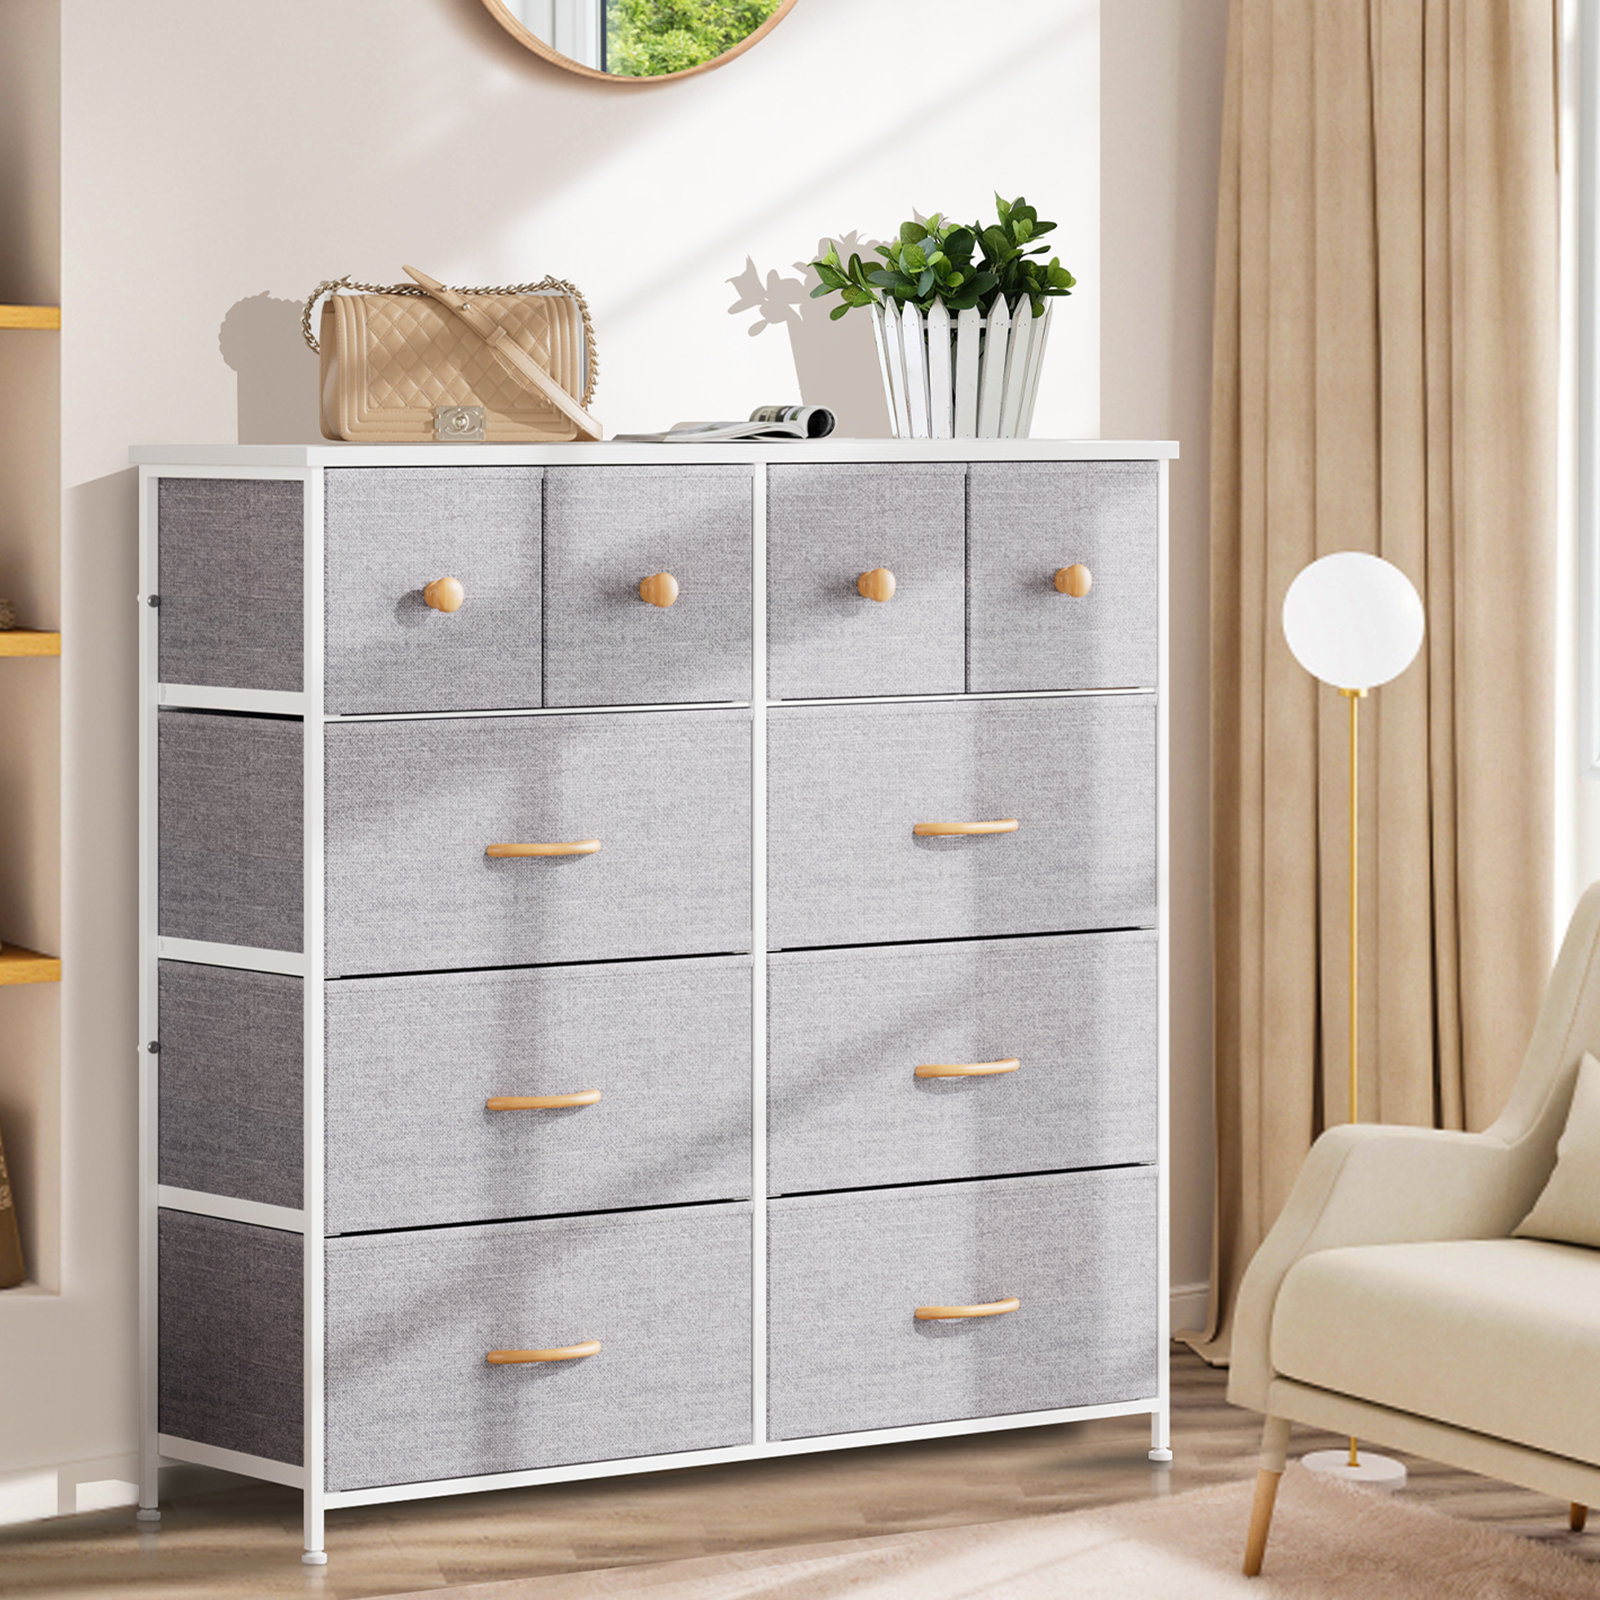 Yitahome  8 Drawer Fabric Dresser Storage Tower Wooden Top Light Gray